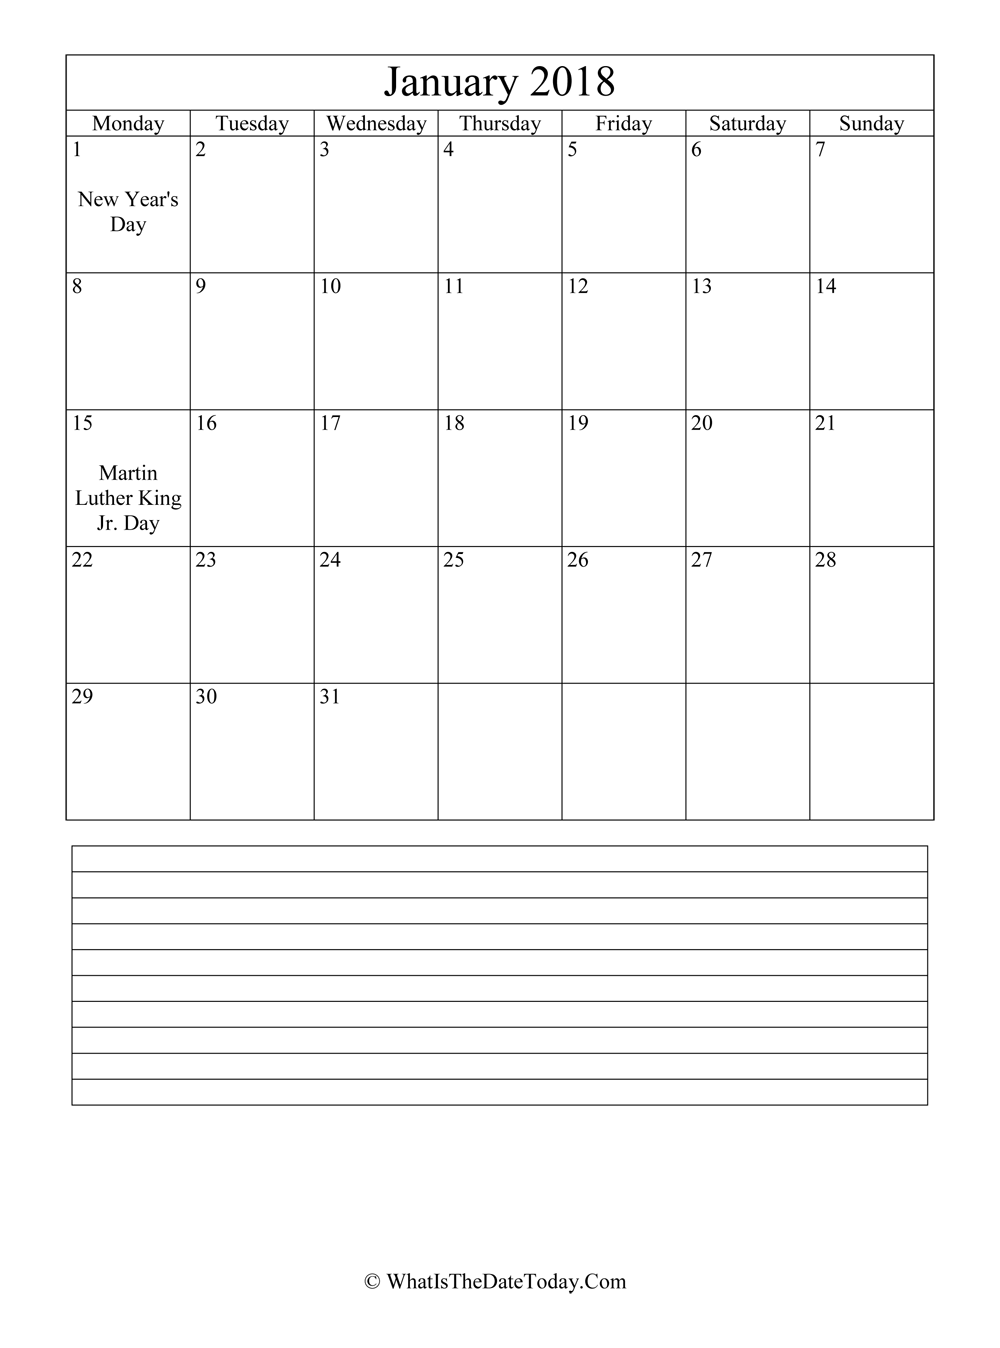 january 2018 calendar editable with notes in vertical layout